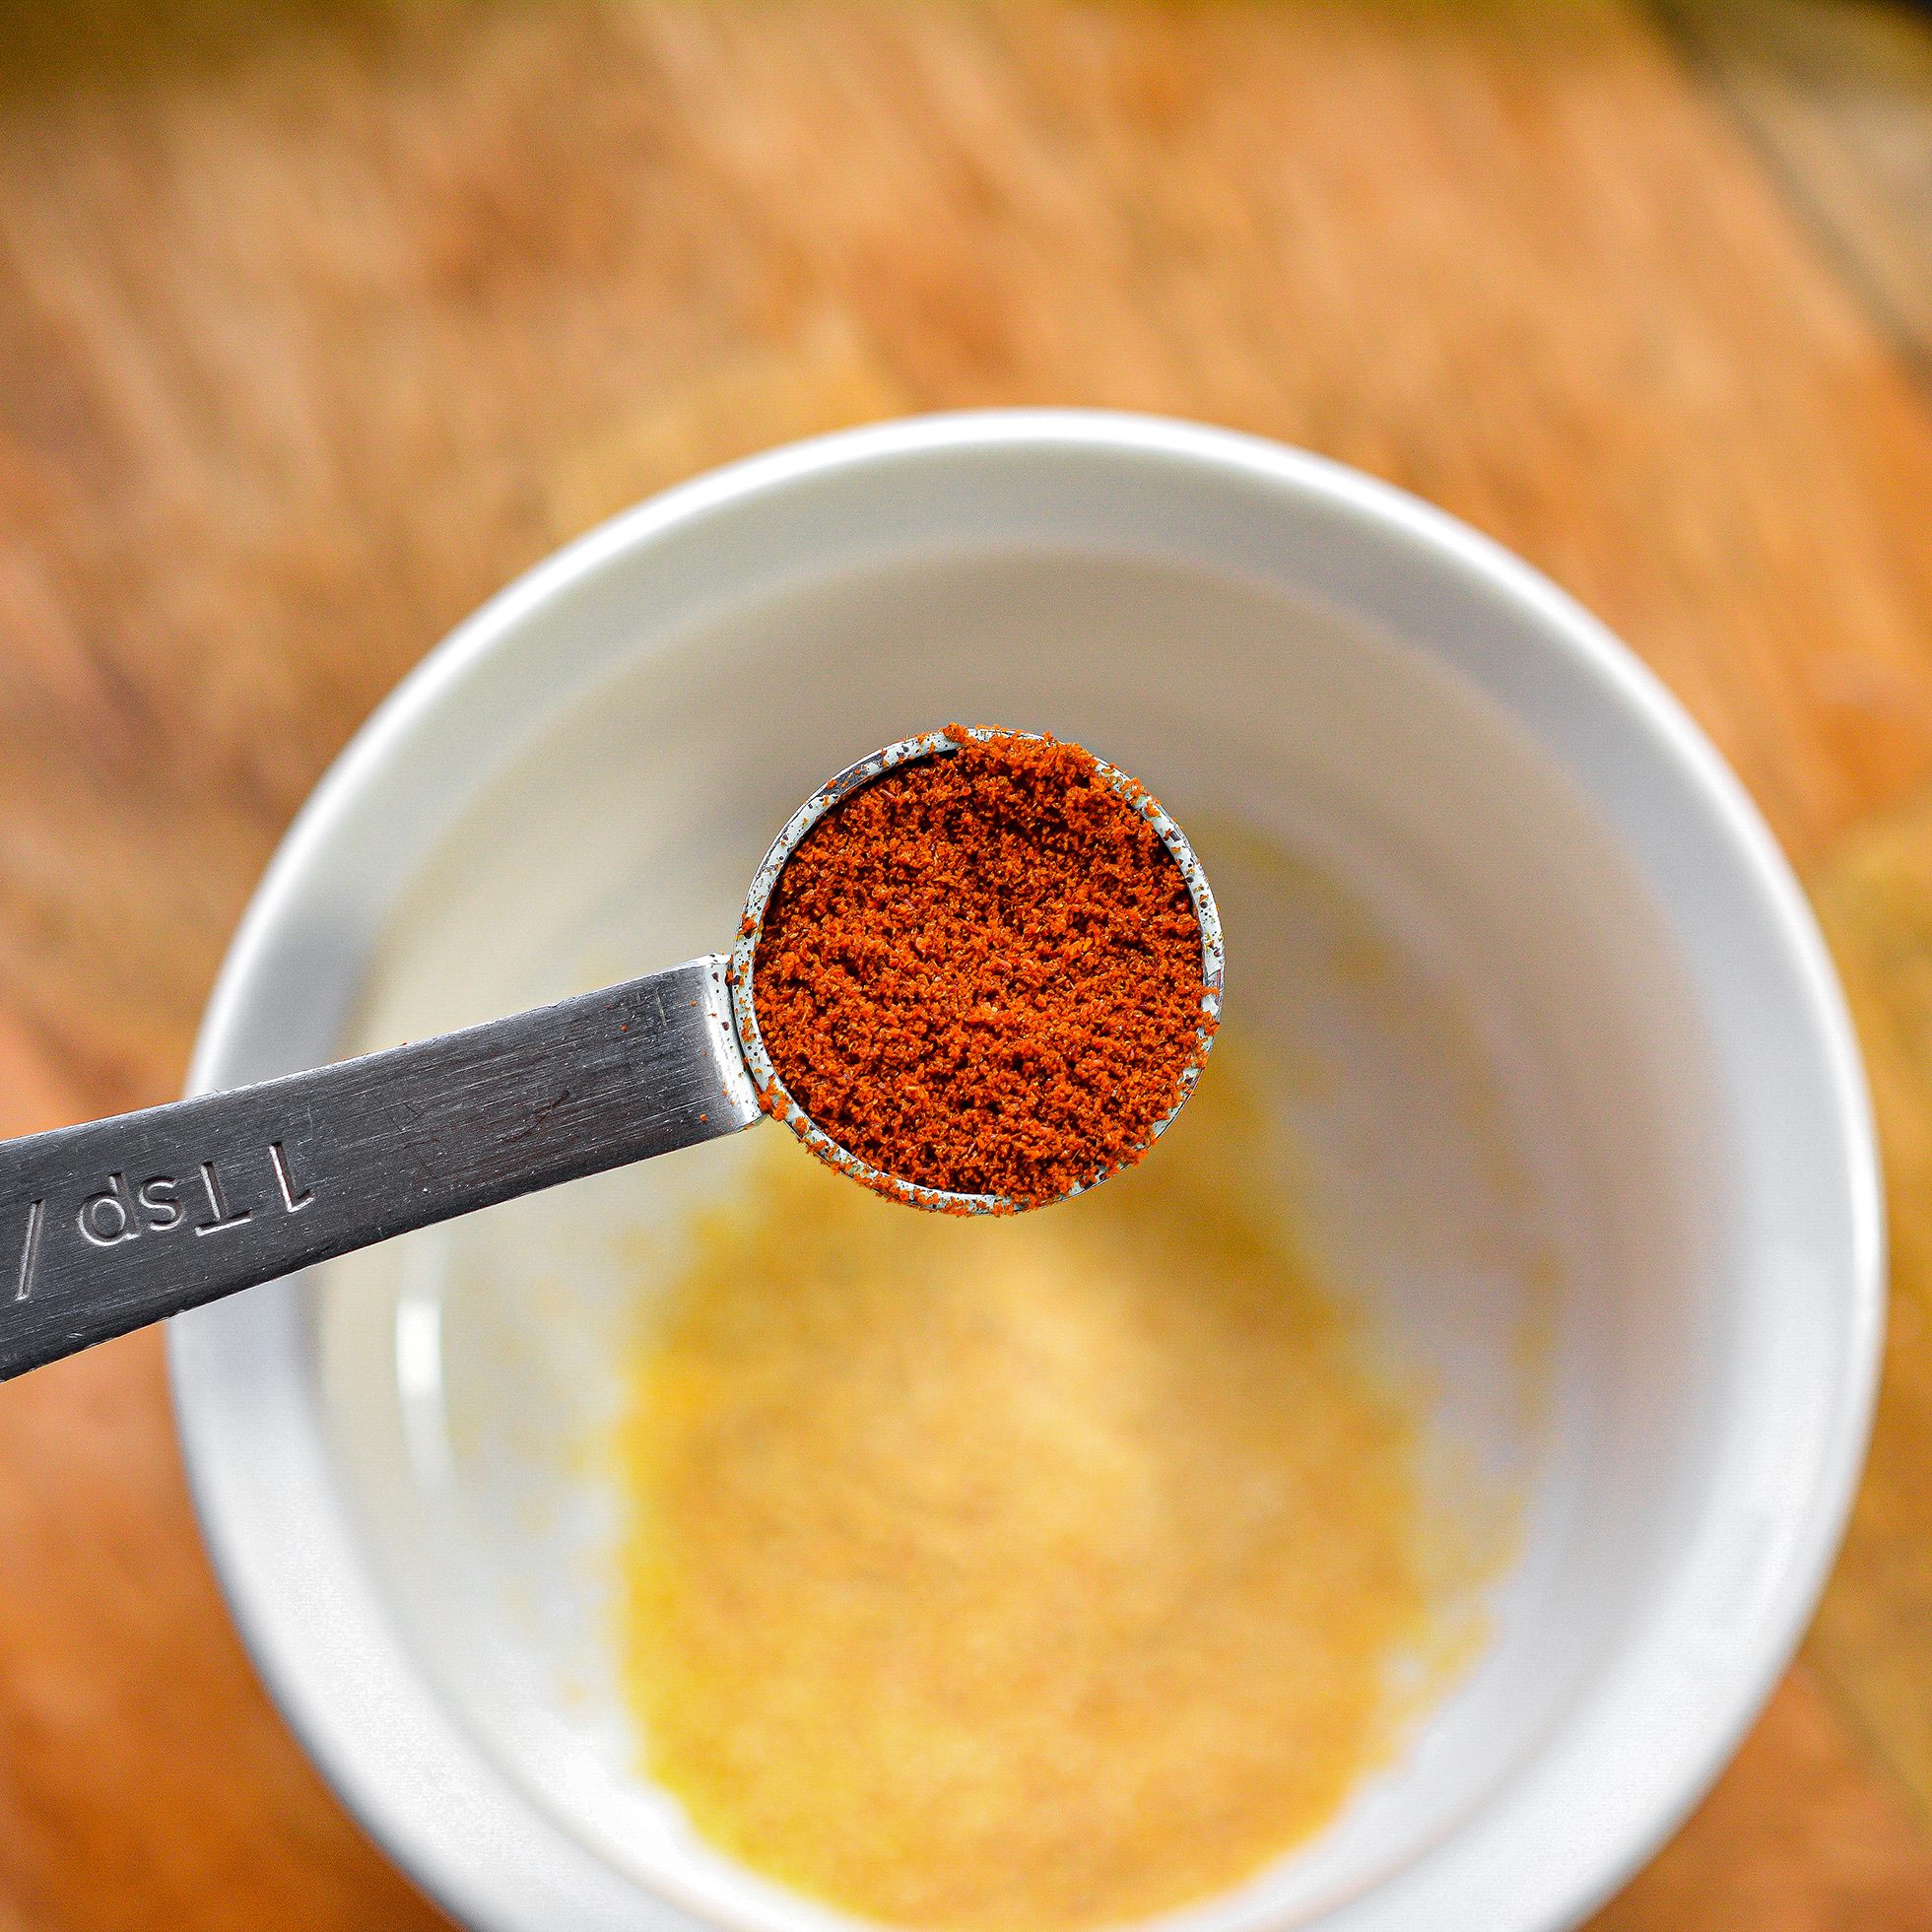 In a small bowl, combine the Italian seasoning, garlic powder, paprika and salt and pepper to taste.